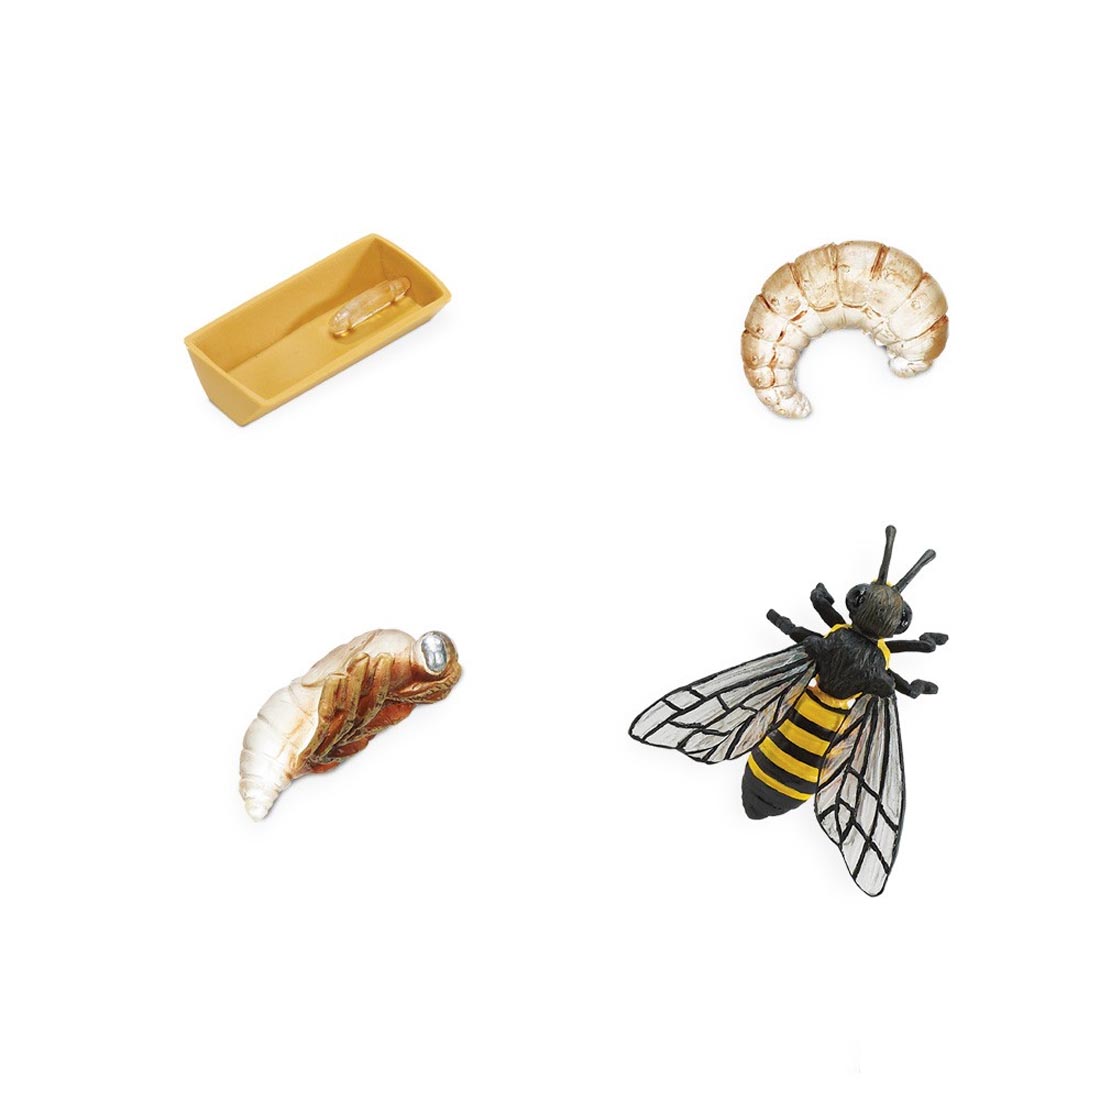 Four figurines to show the Life Cycle of a Honey Bee